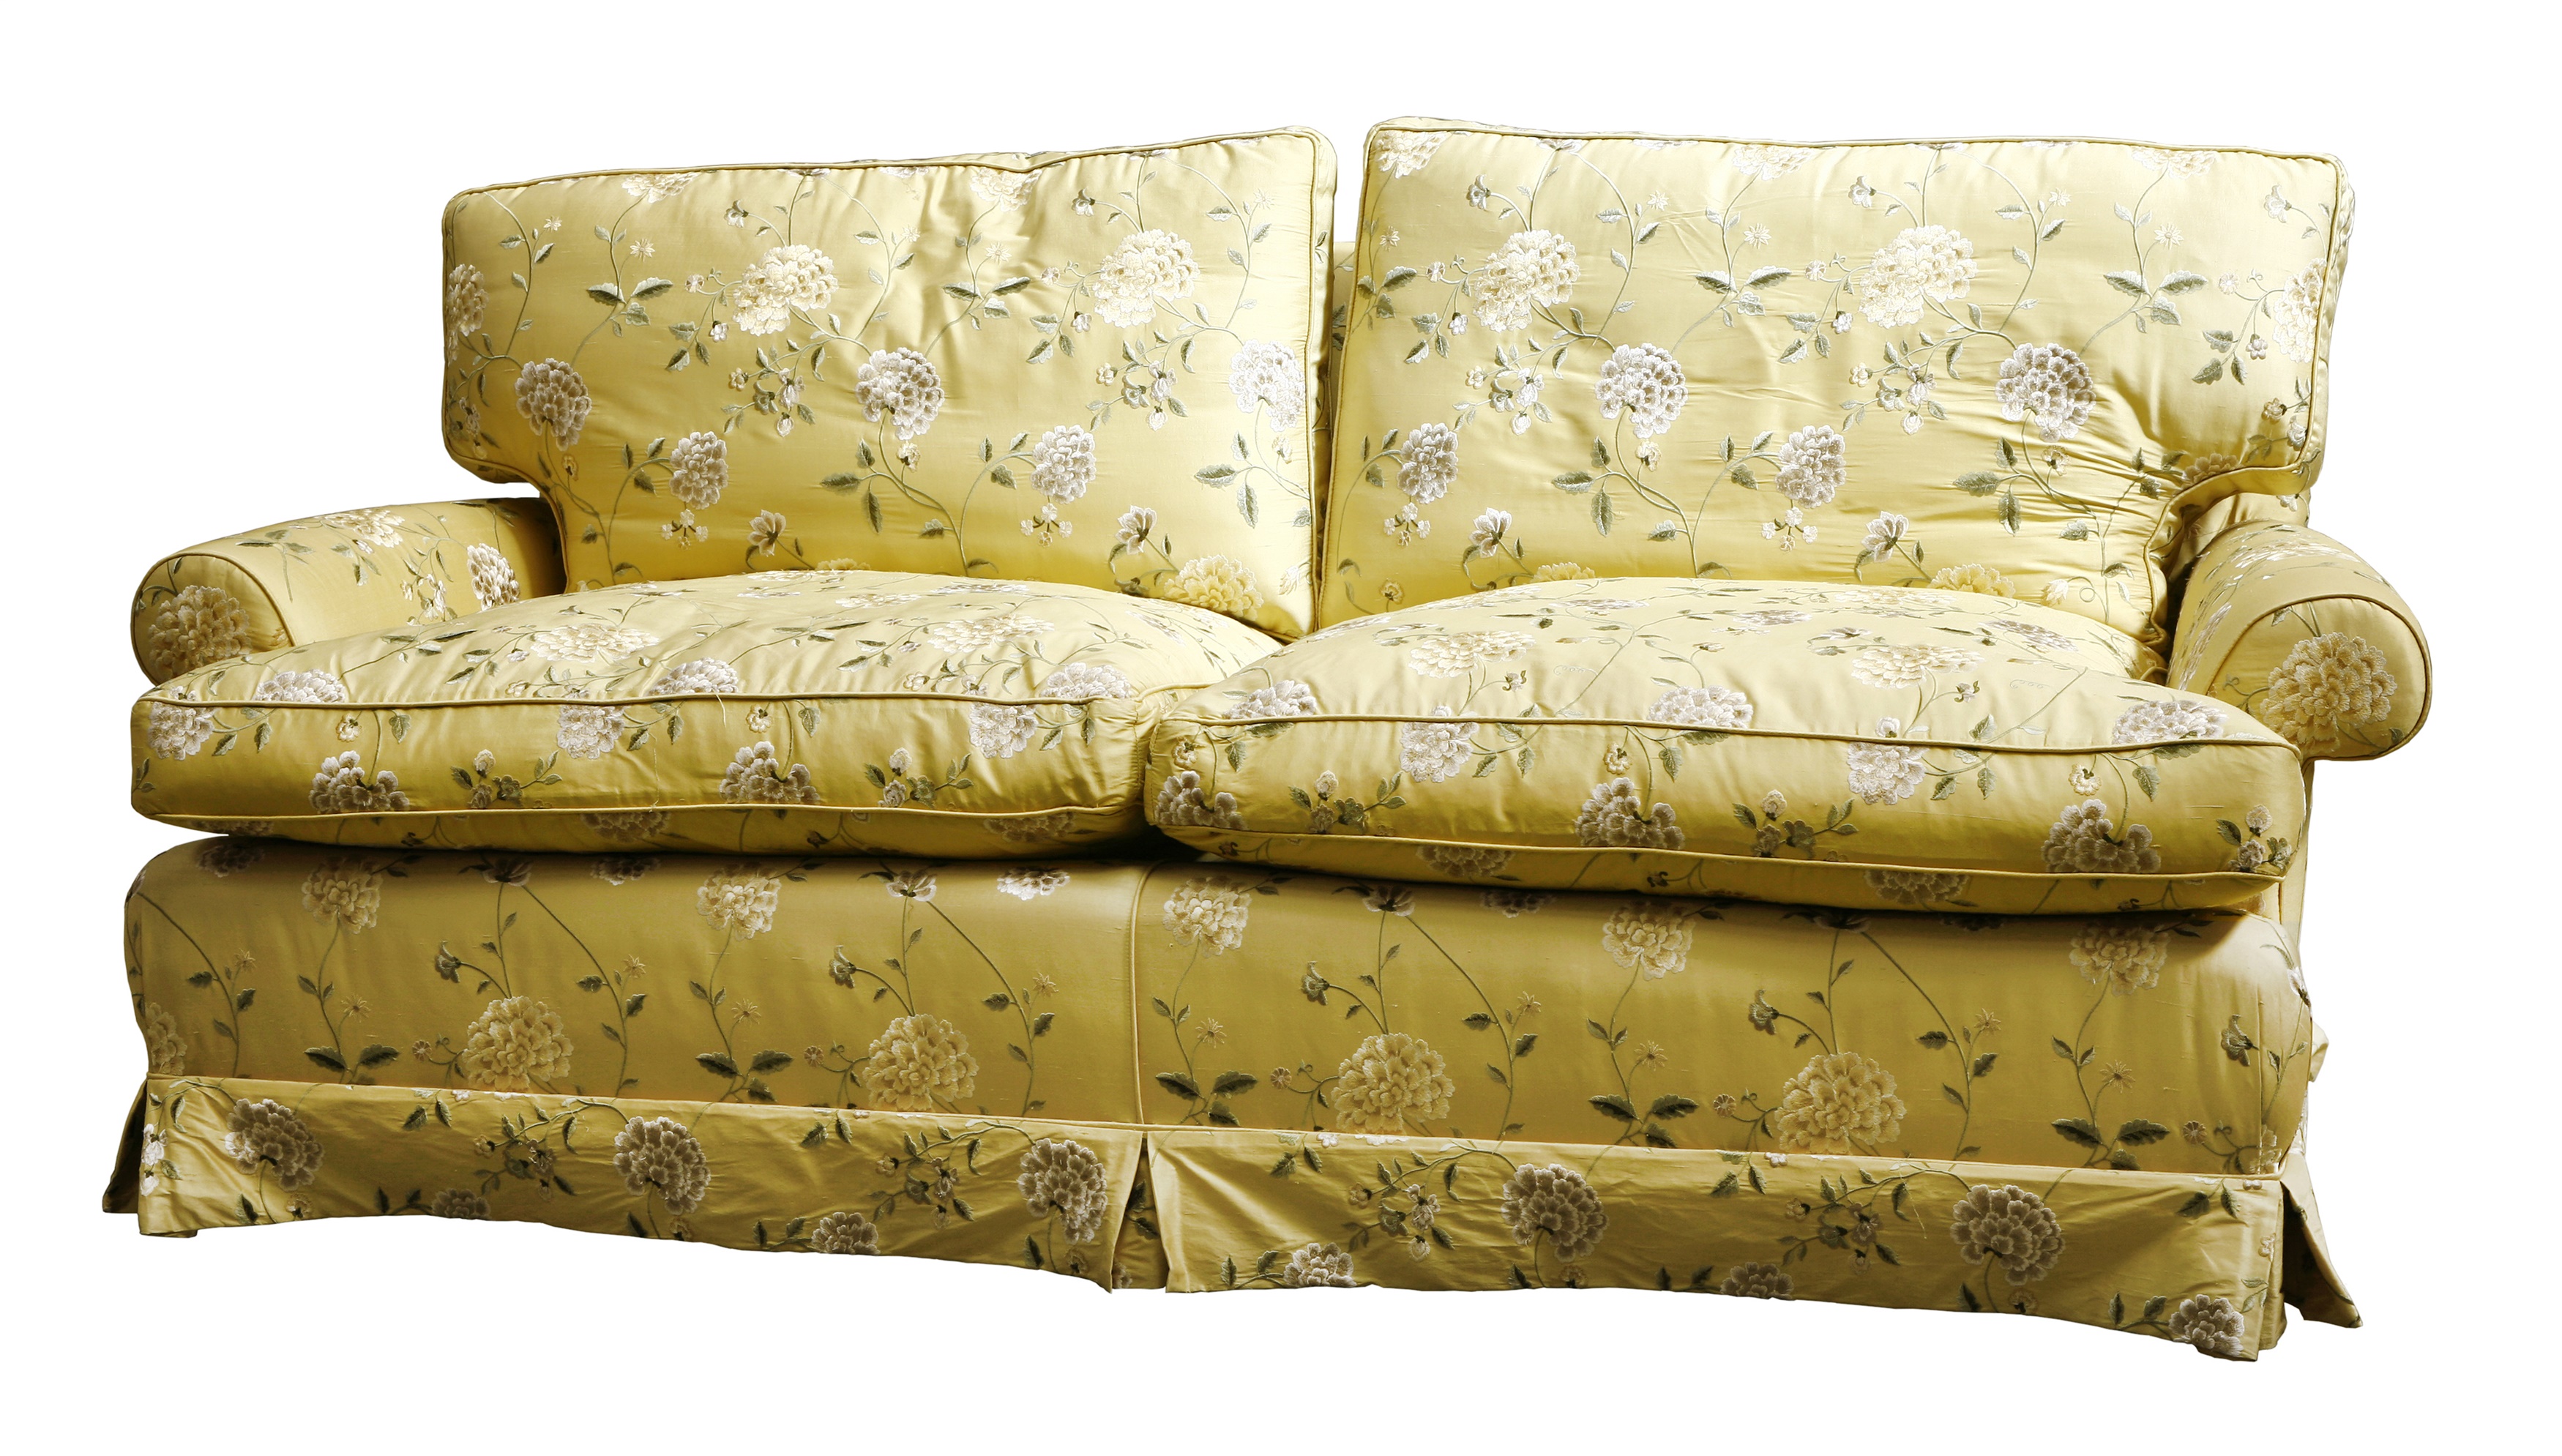 A modern silk upholstered settee, by Colefax & Fowler